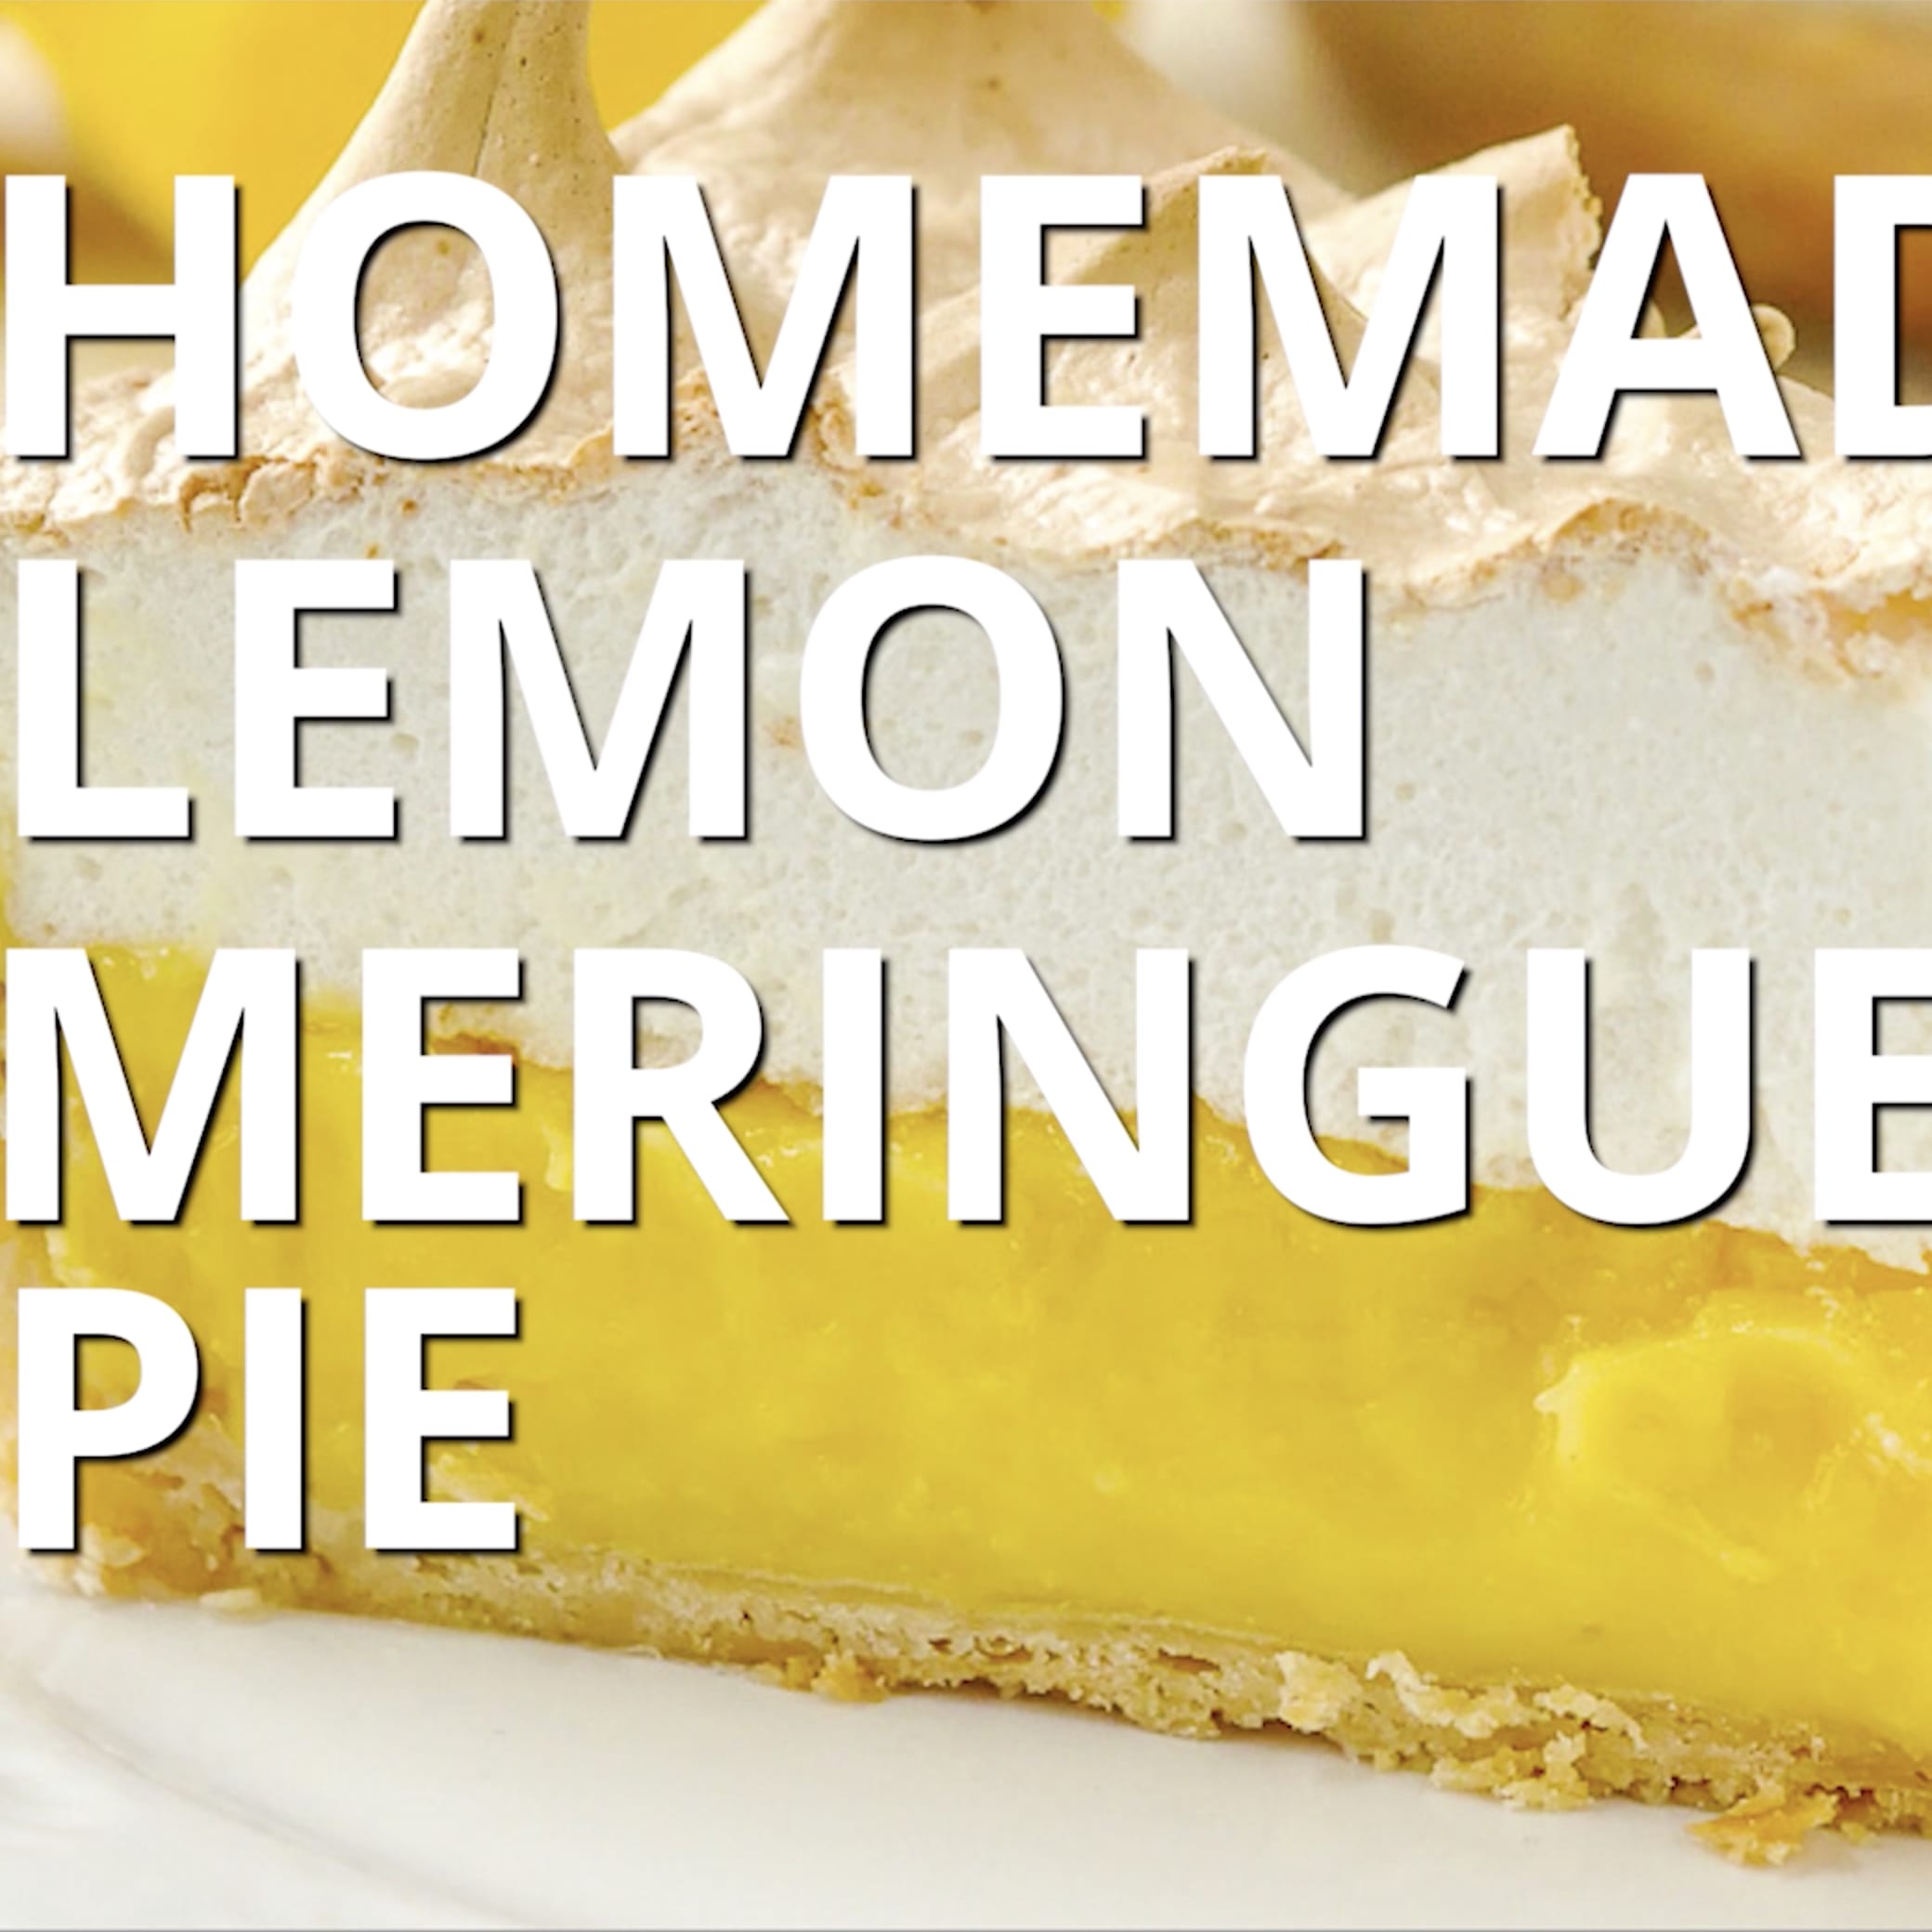 Homemade Lemon Meringue Pie - easy, old fashioned & scratch made!